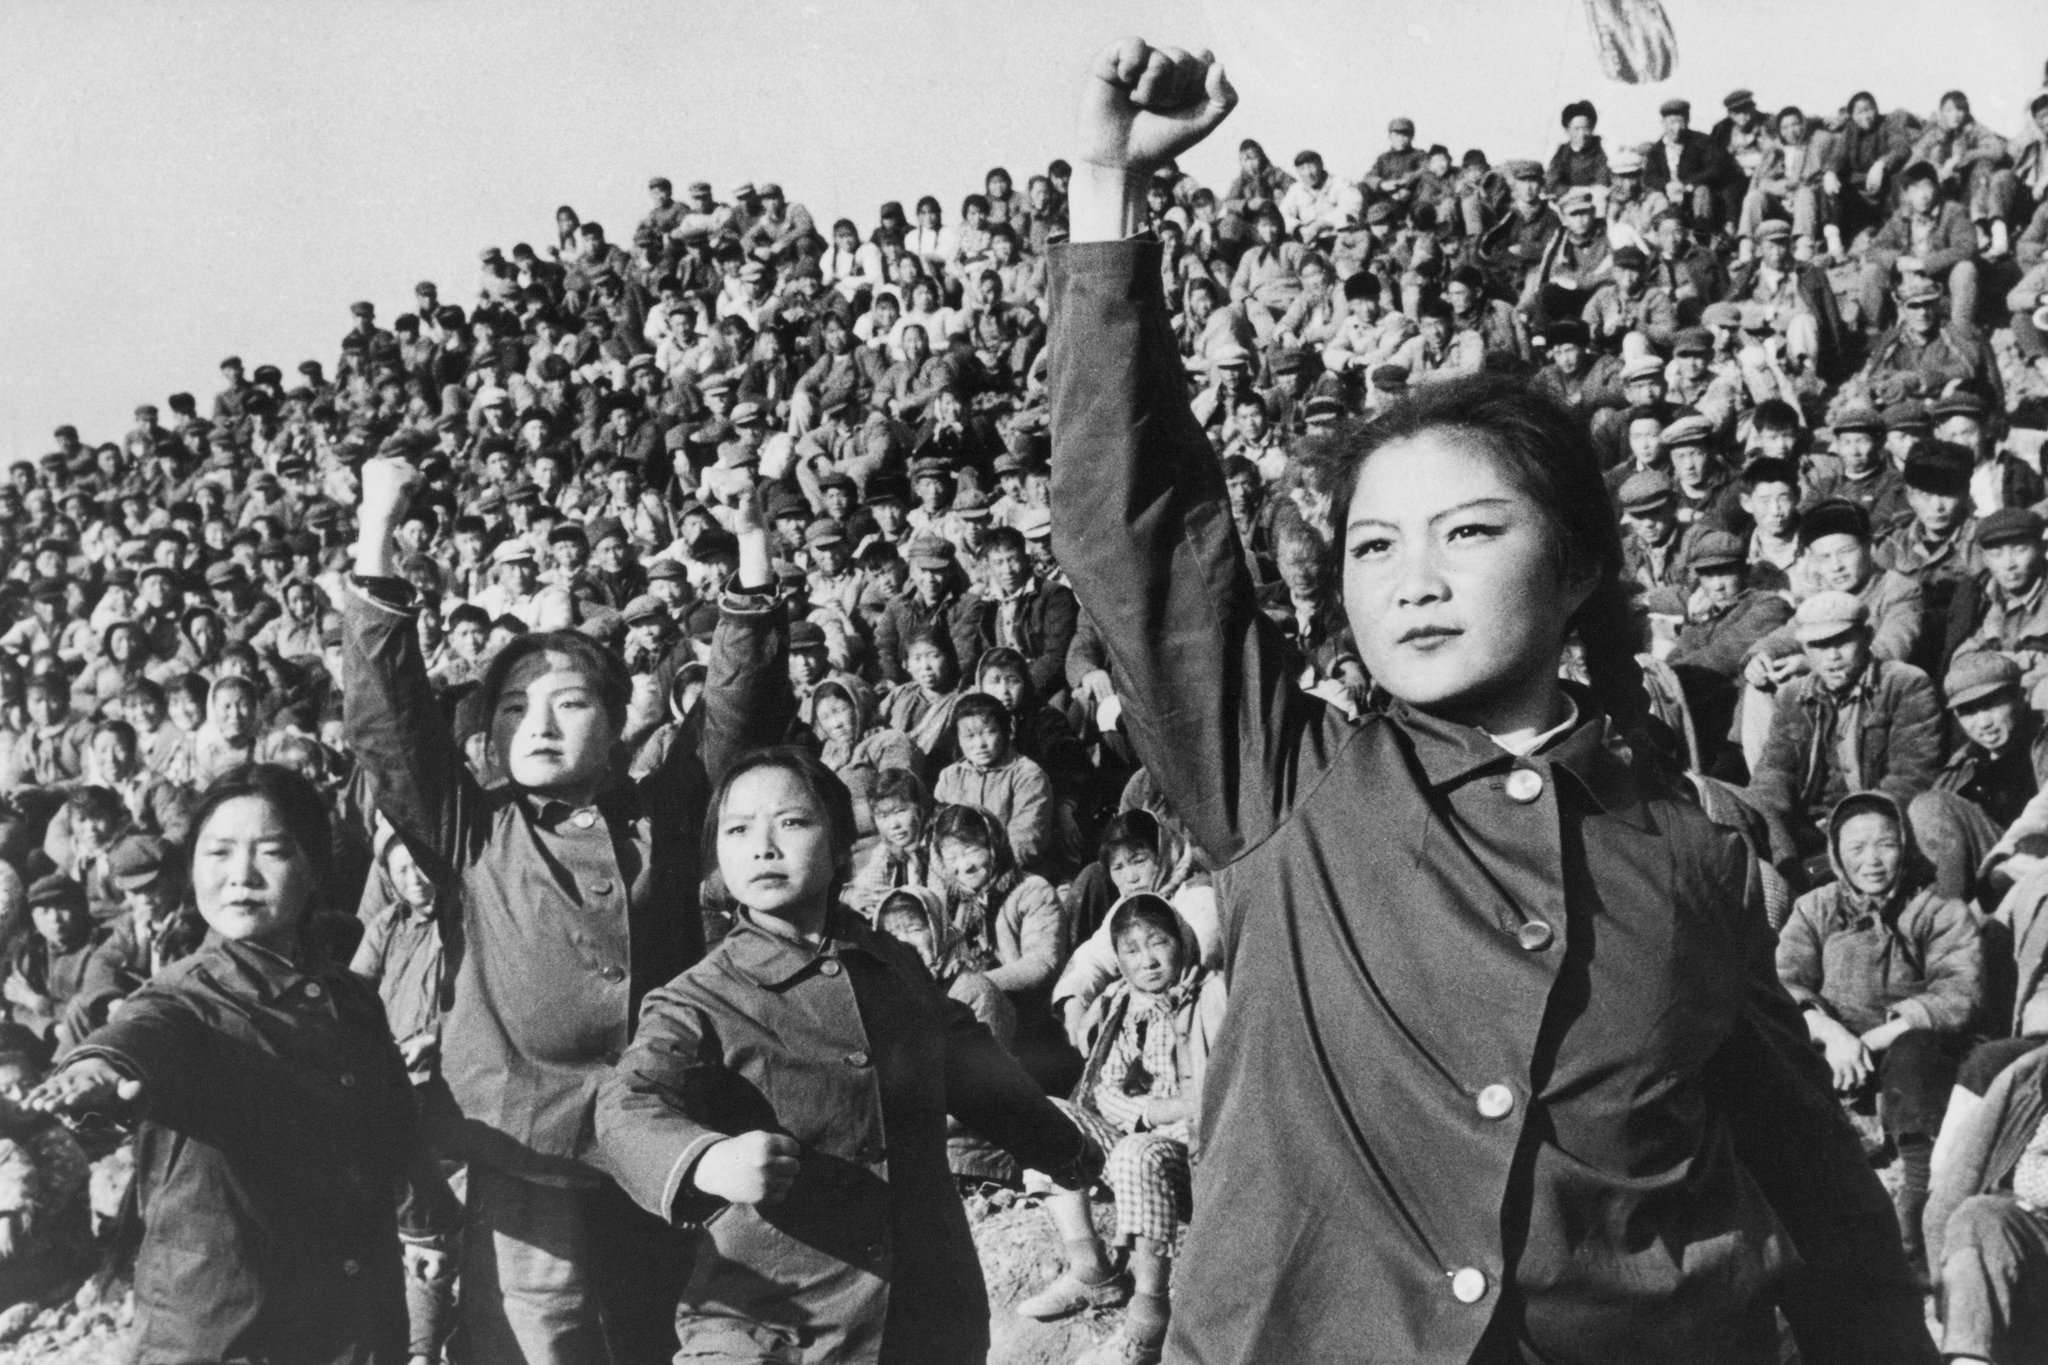 Young minds gripped in the Cultural Revolution.